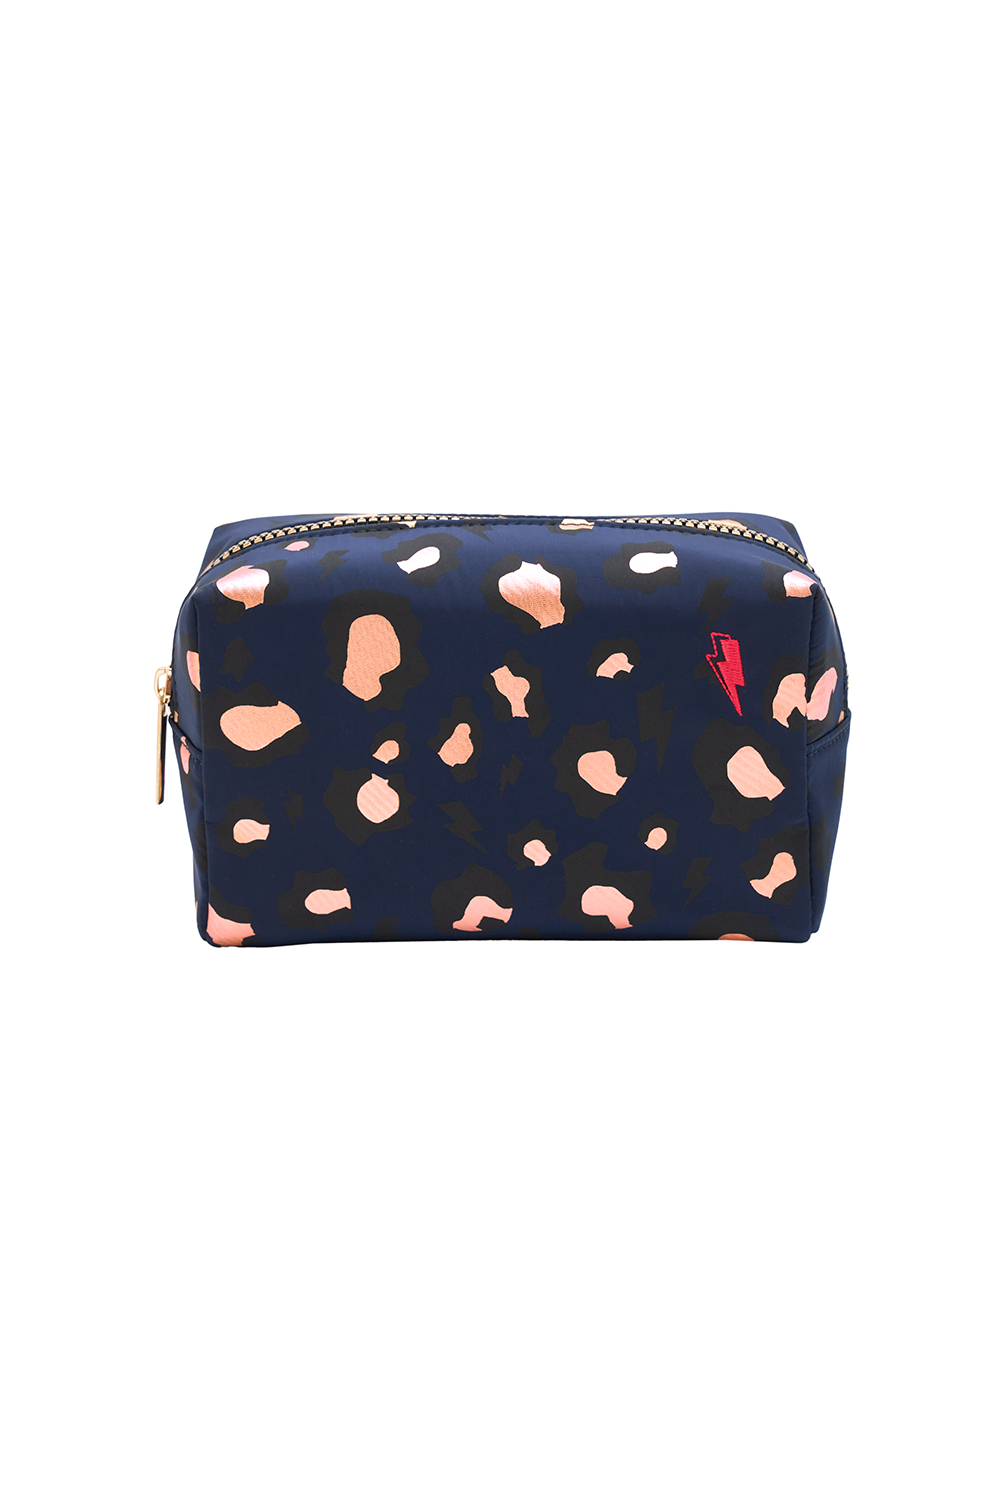 Scamp & Dude: Scamp & Dude x Ruby Hammer Black With Red Foil Leopard Makeup Bag